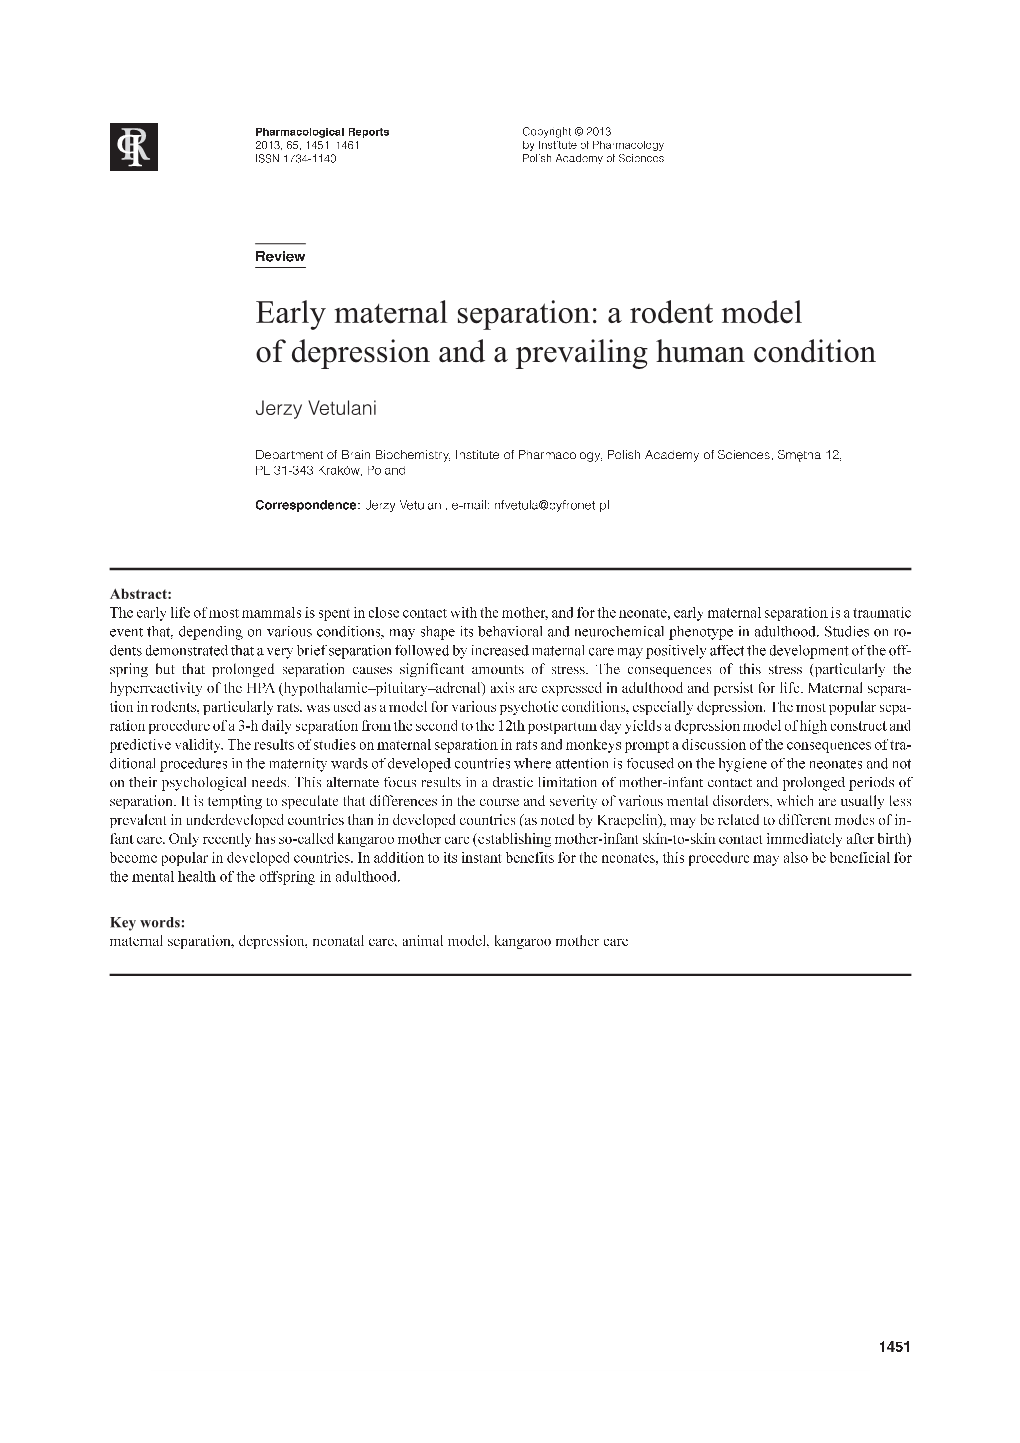 Early Maternal Separation: a Rodent Model of Depression and A